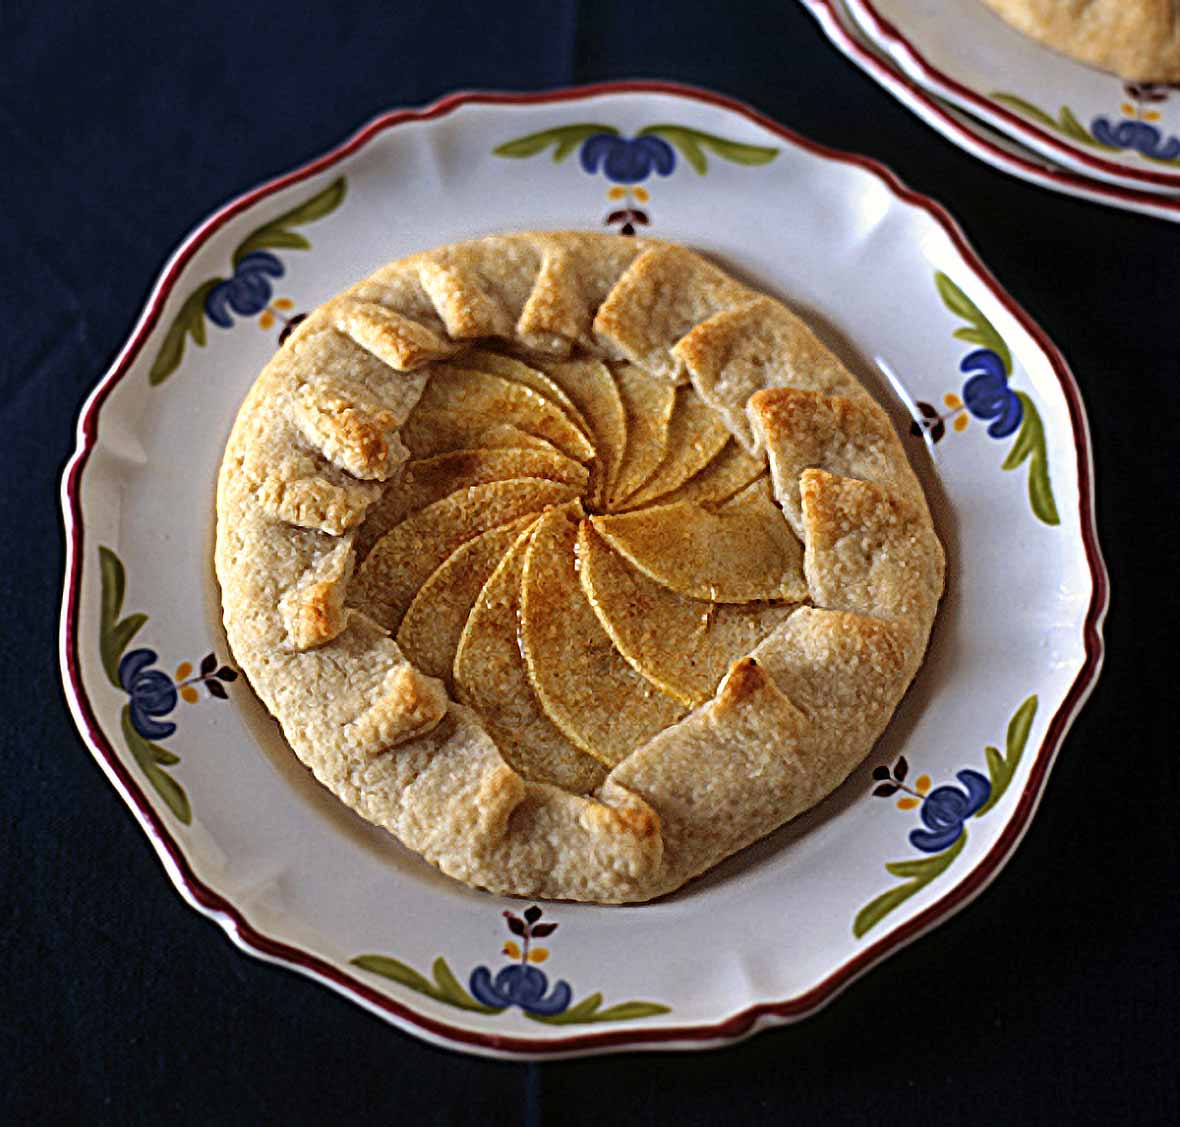 Individual rustic apple tart with the crust folded over a filling of sliced apples on a flowered plate